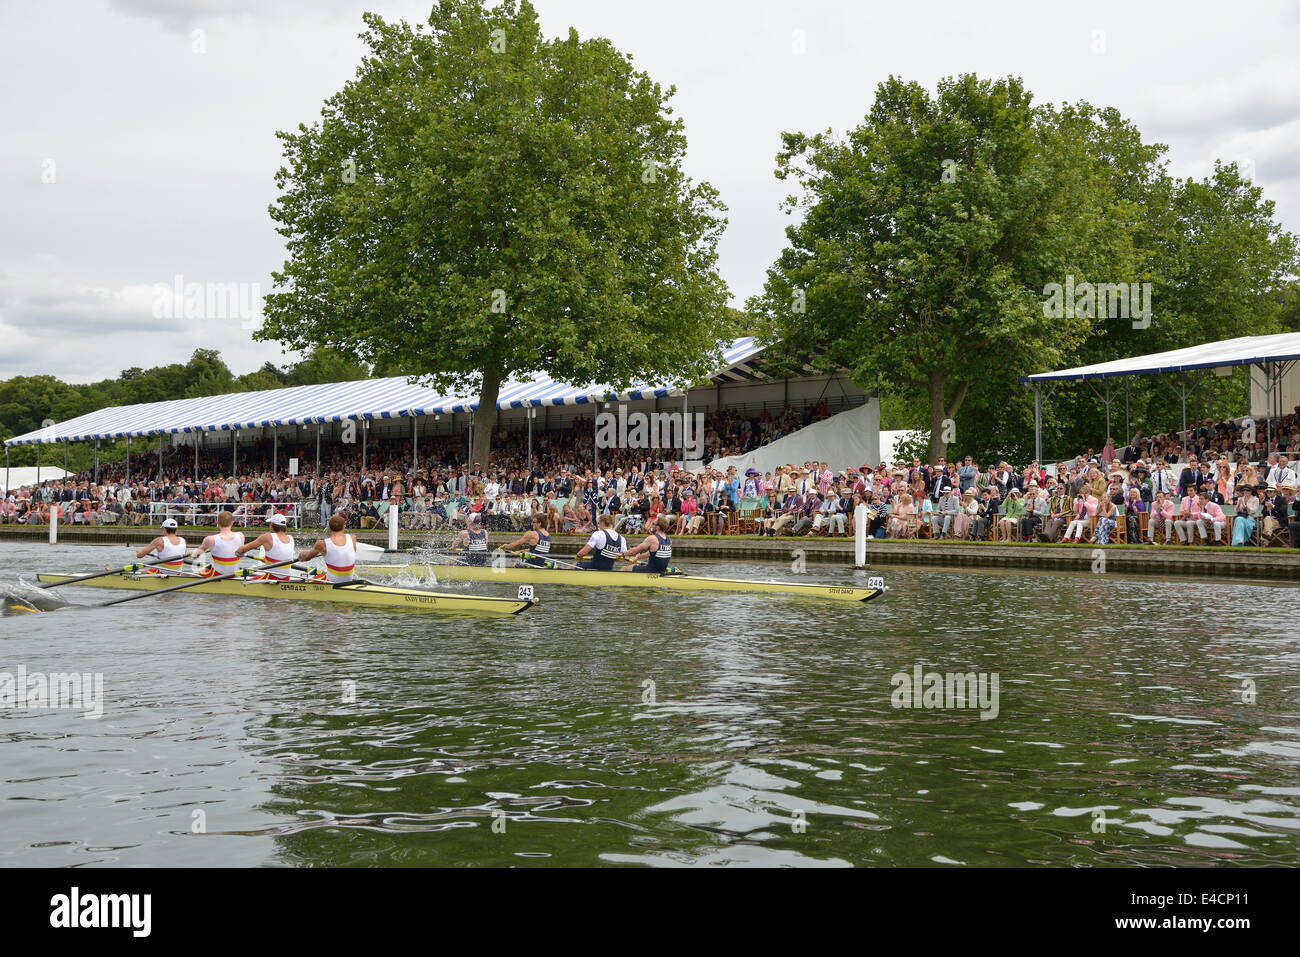 Henley Royal Regatta 2014, Henley on Thames, Oxfordshire, England, UK final of the Prince of Wales Challange Cup won by Leander. Stock Photo